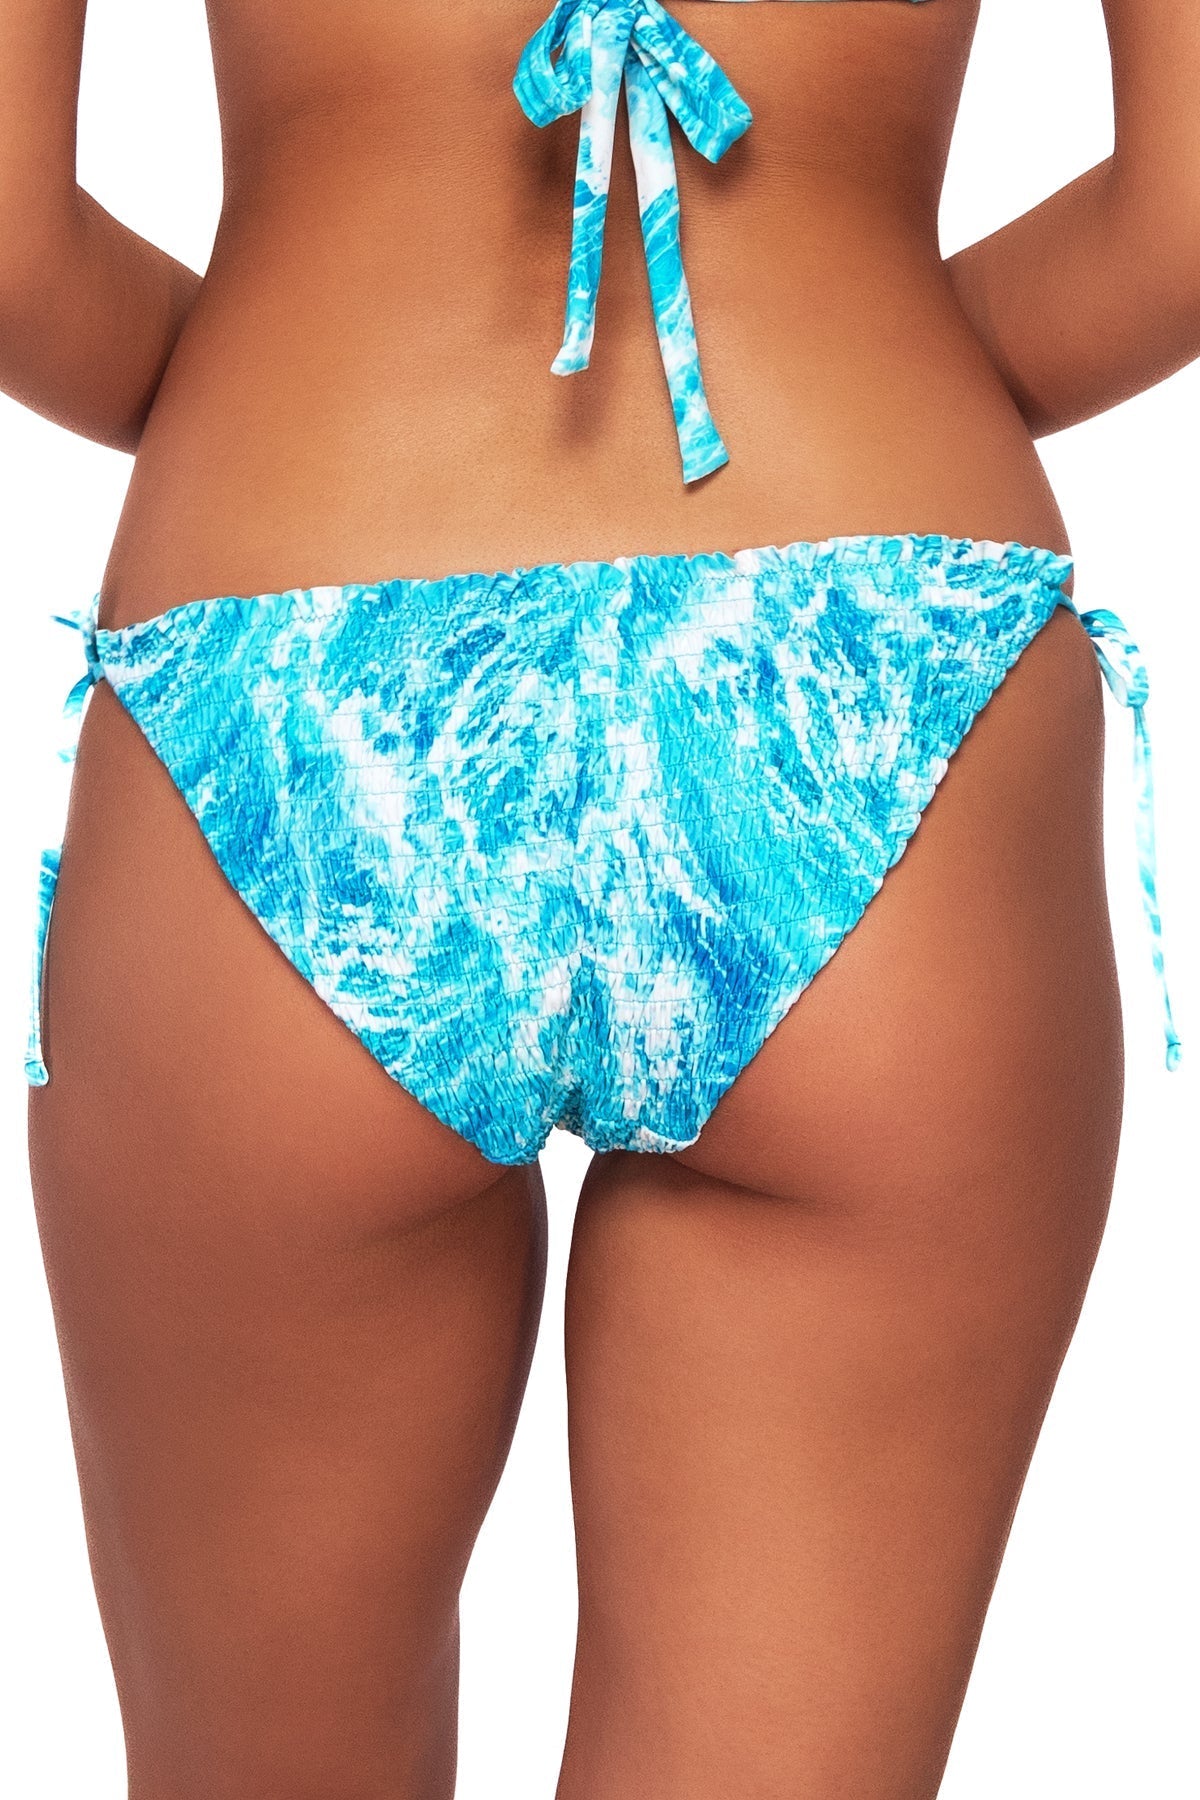 Swim Systems &quot;Brands,Swimwear&quot; Swim Systems Out to Sea Kali Tie Side Bottom